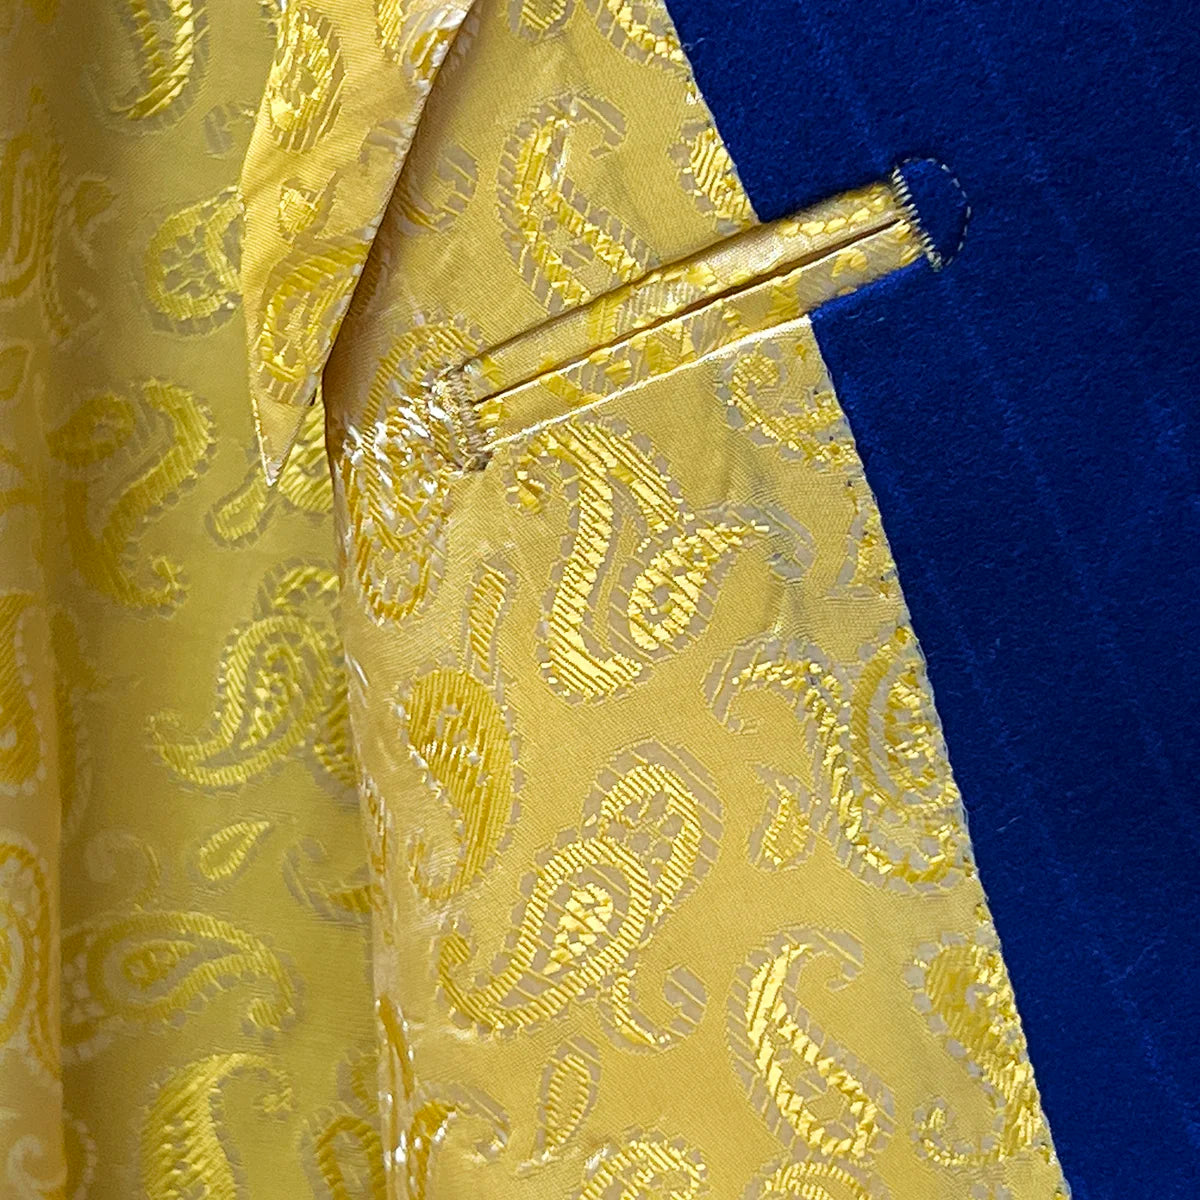 Flashy yellow gold lining inside the royal blue pinstripe suit.